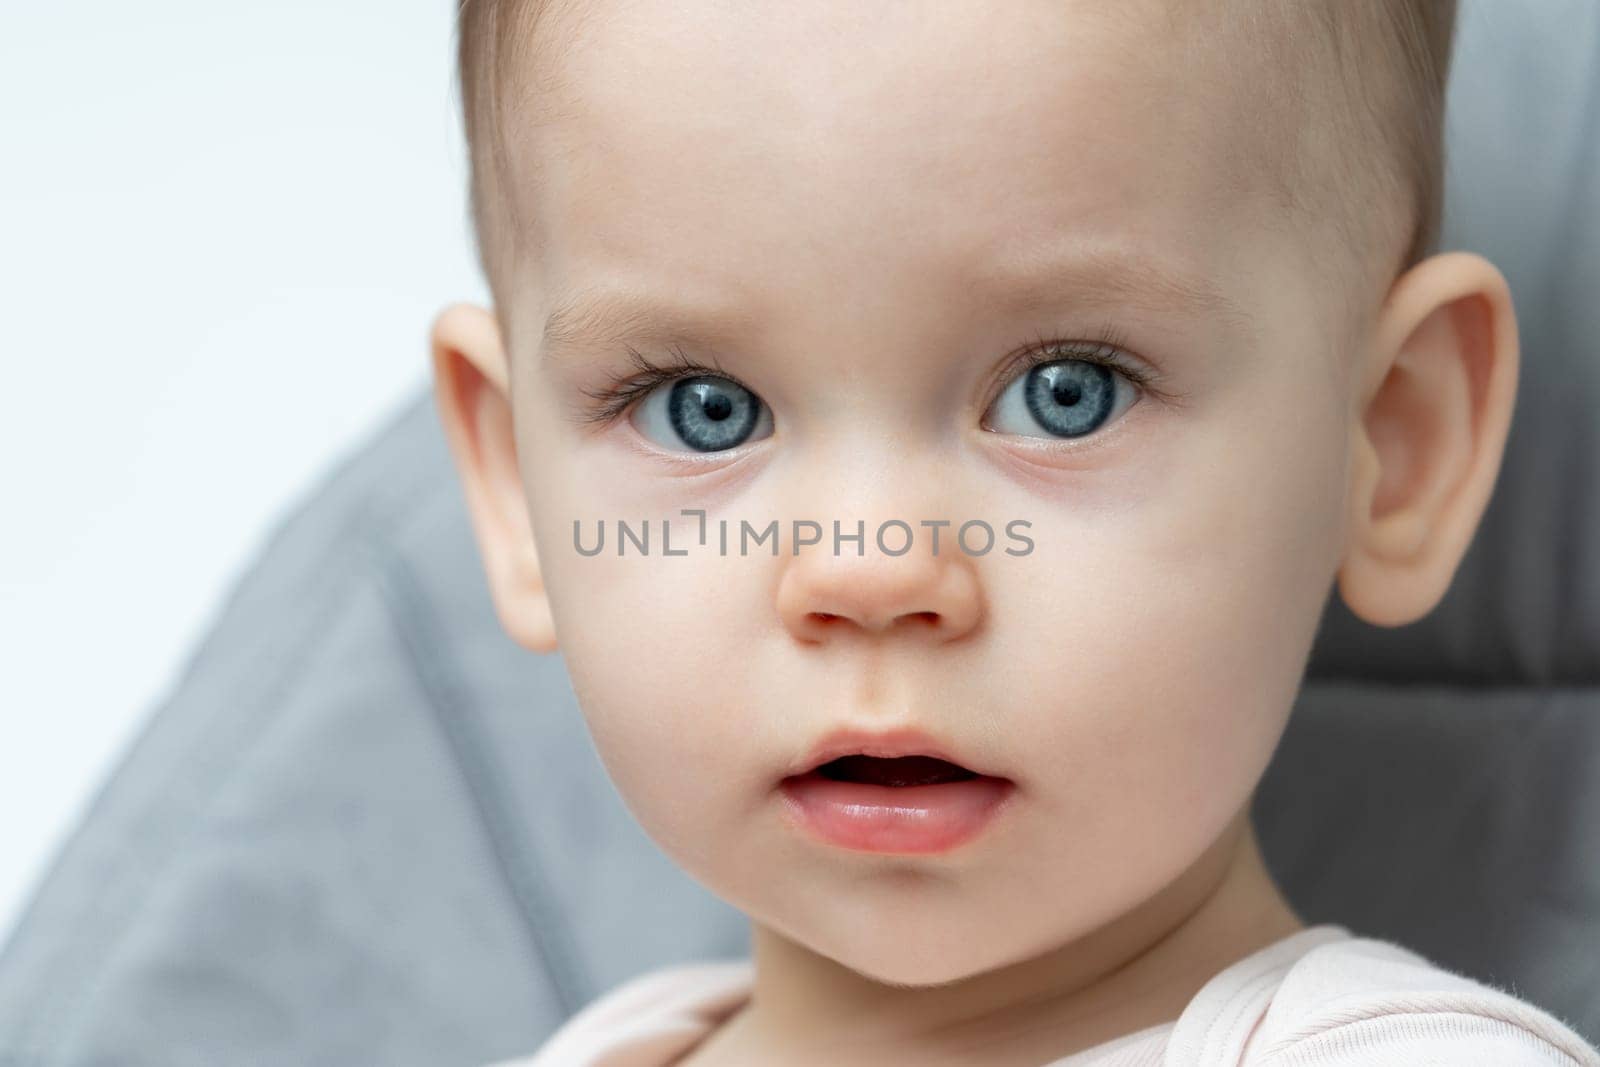 A happy baby with blue eyes is sitting in a high chair, smiling at the camera while showing off their cute nose, cheek, eyelash, ear, and iris